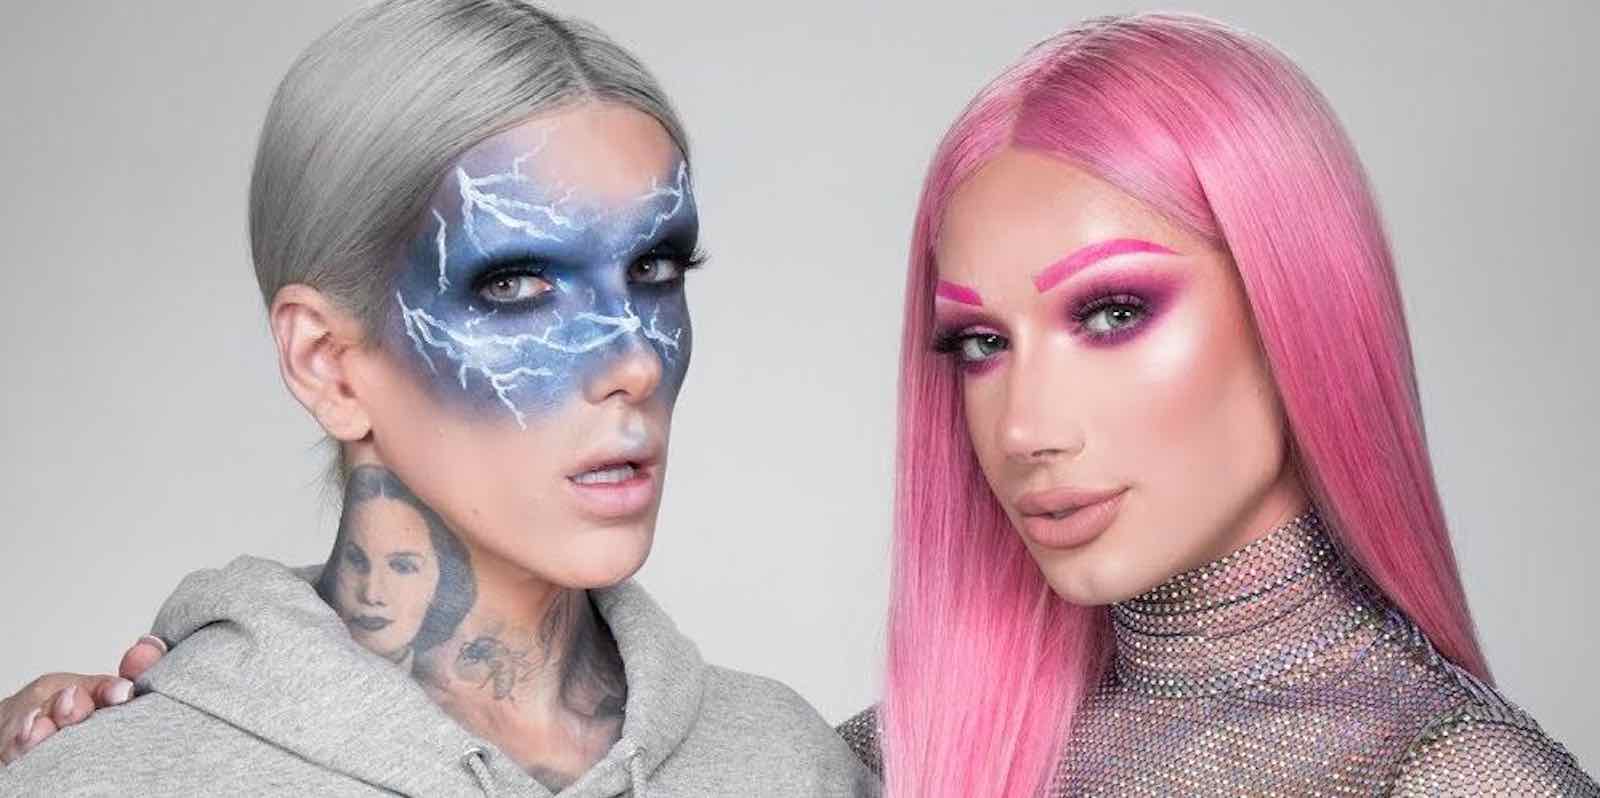 Does Jeffree Star discuss James Charles’s drama in tell-all YouTube video? 